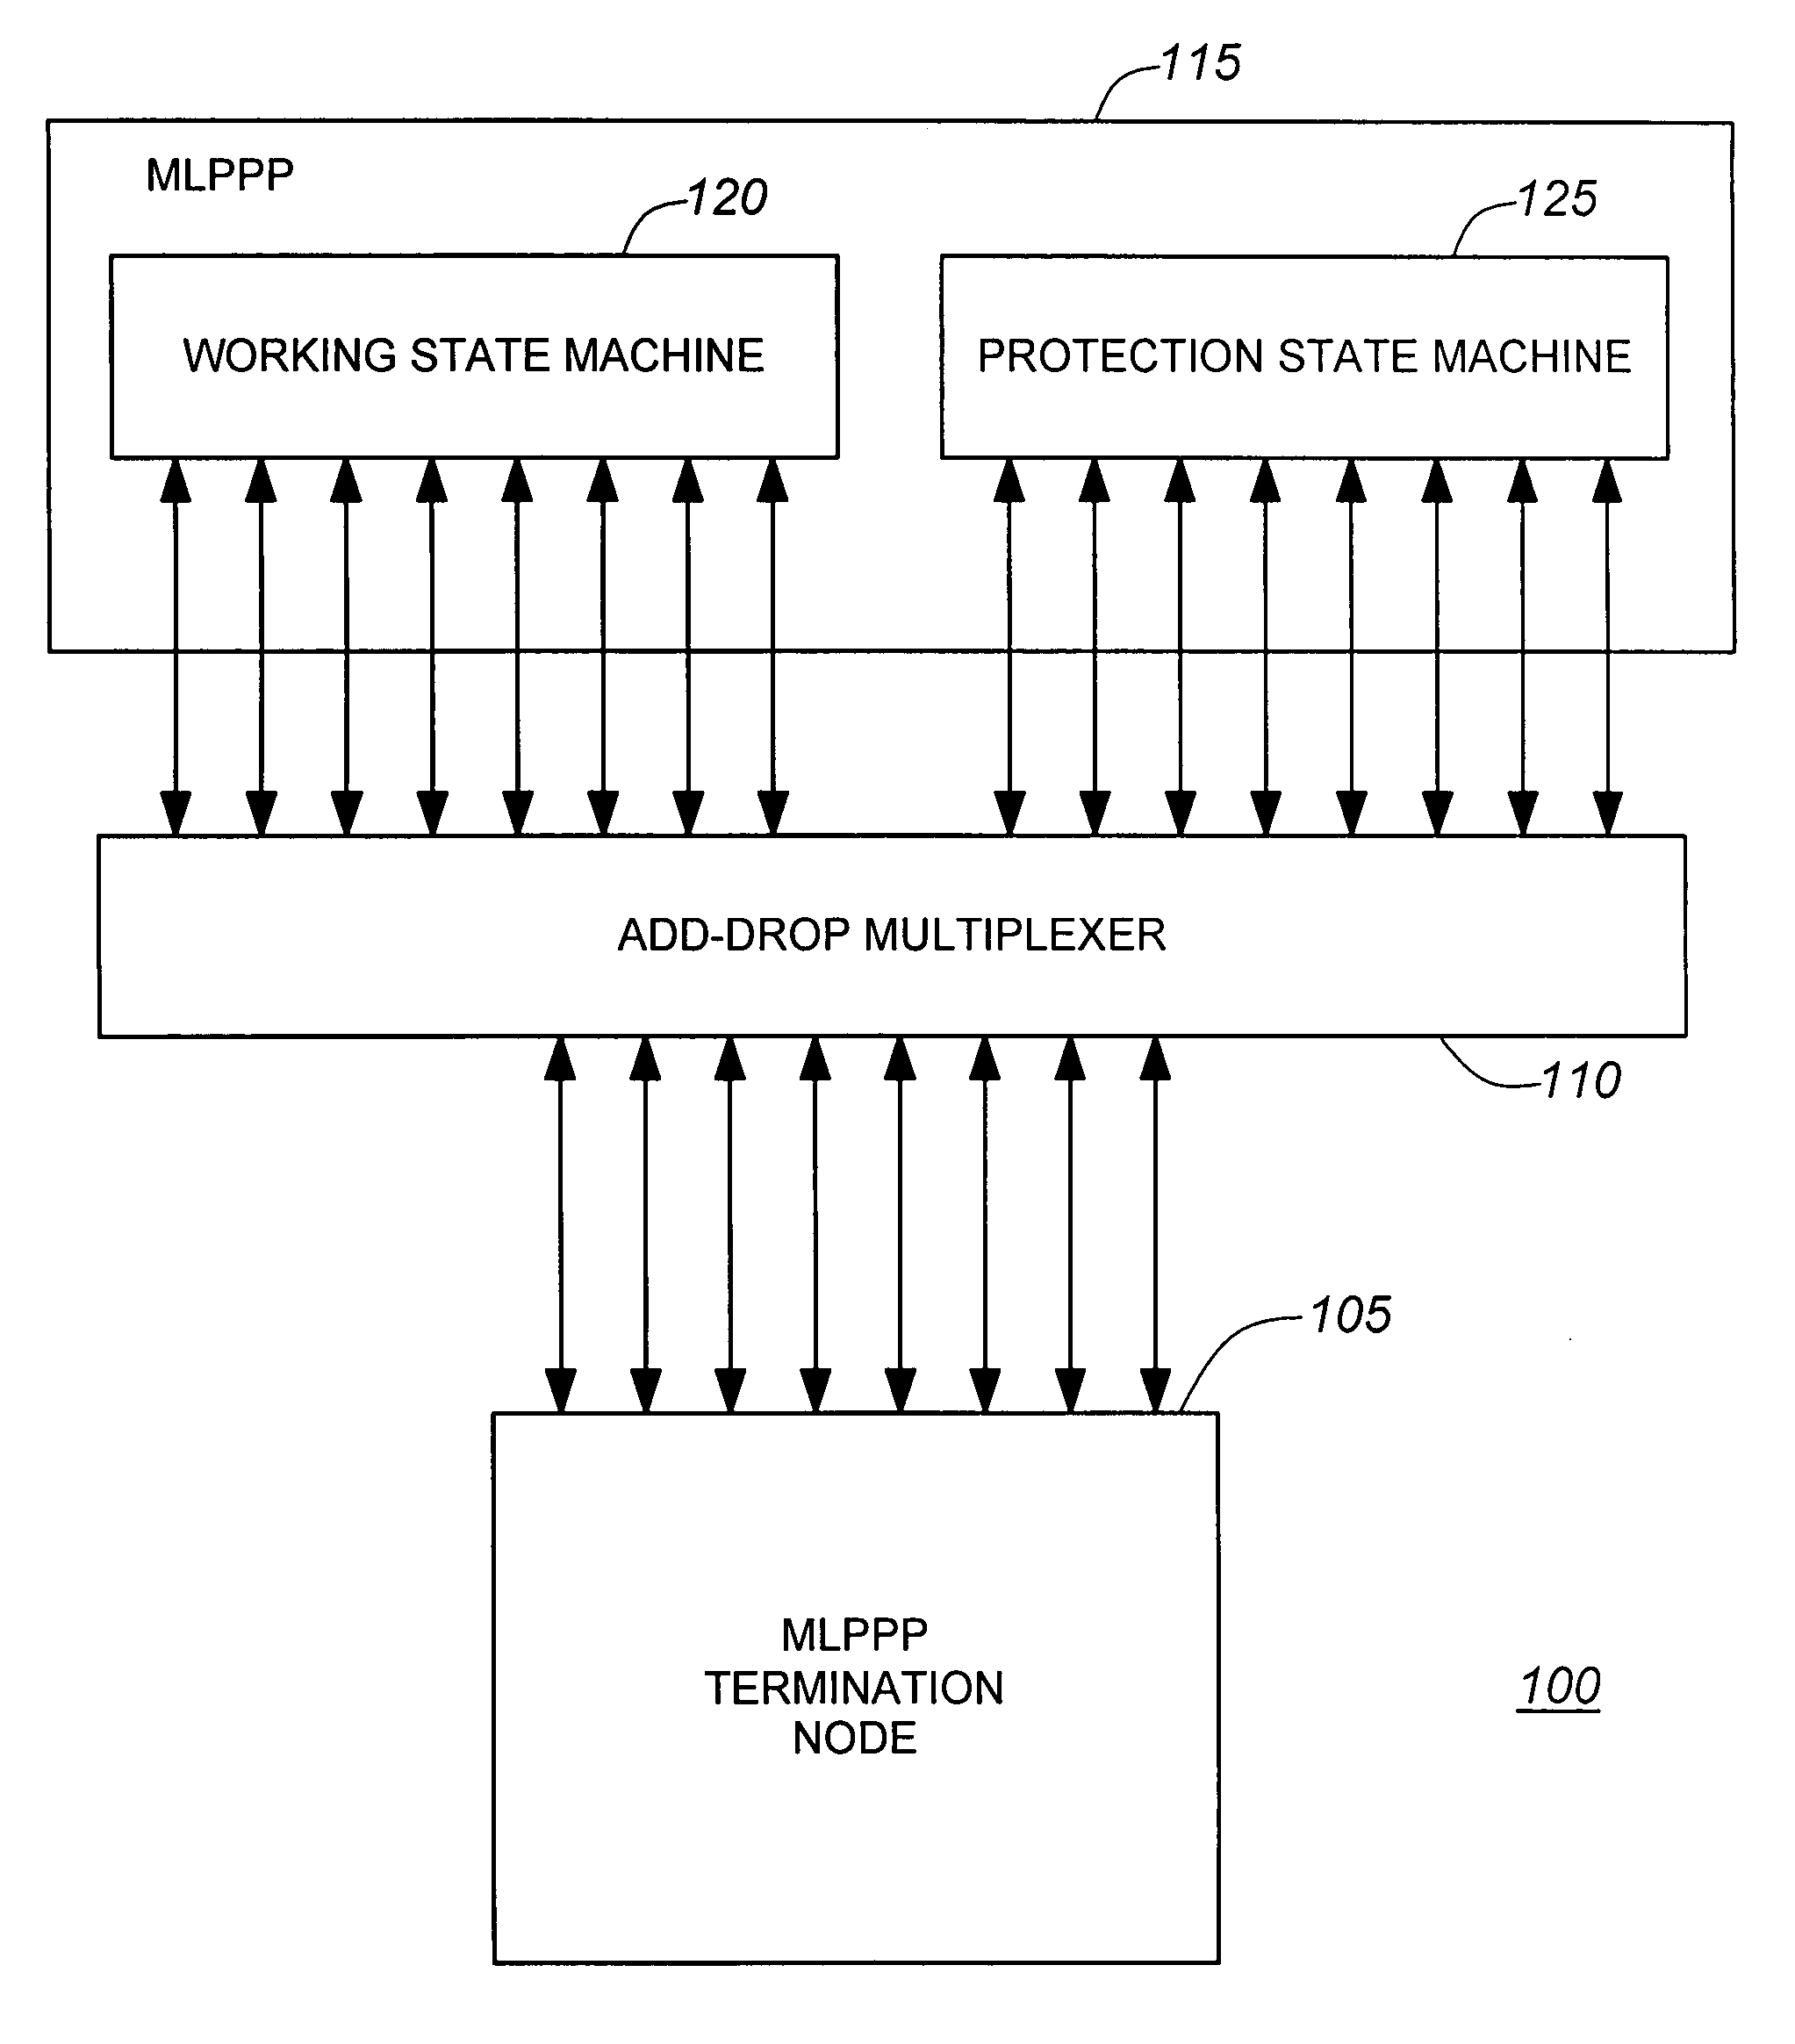 Mechanism and method for non-service affecting APS protection for MLPPP bundles on routing systems